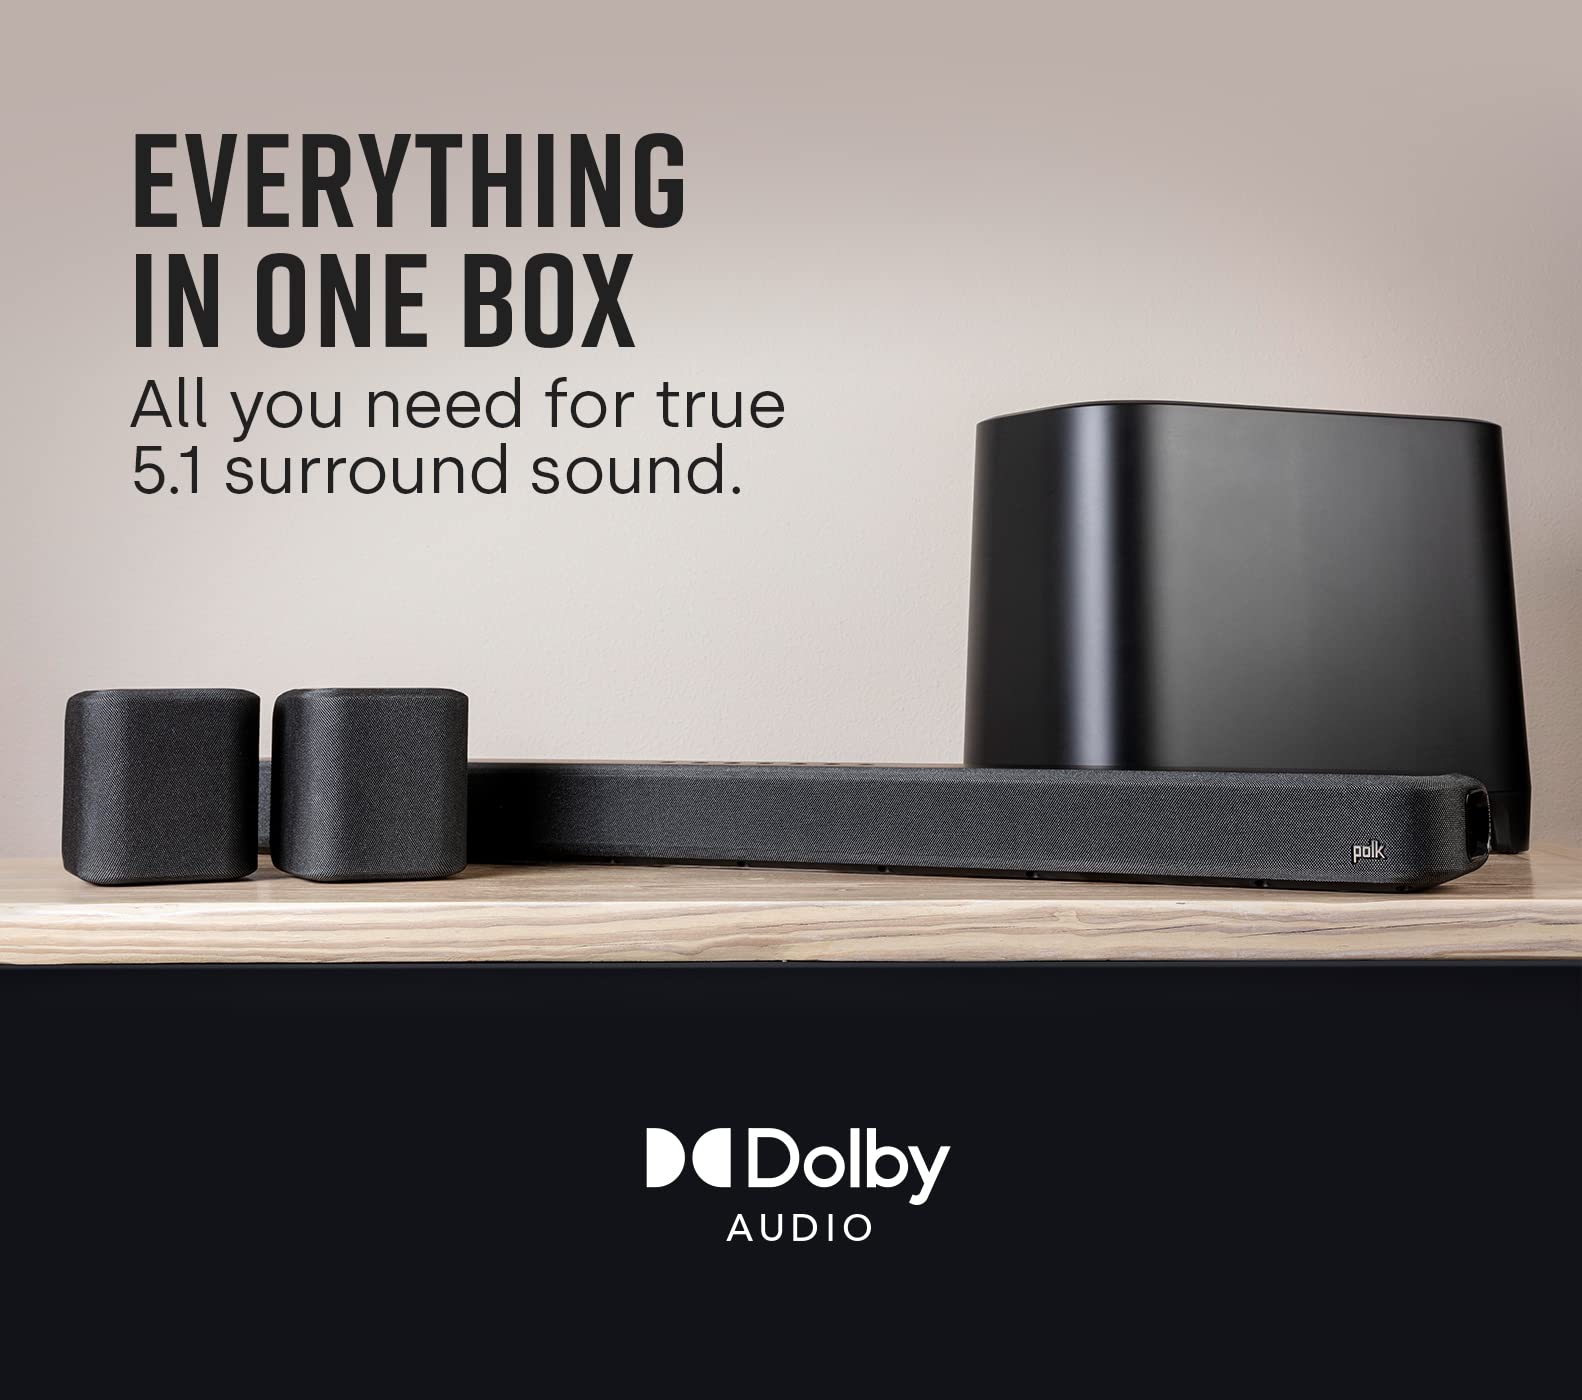 Polk True Surround III 5.1 Channel Wireless Surround Sound System, Includes Sound Bar, L & R Rear Surrounds and 7'' Subwoofer, Dolby Digital Decoding, Built-in Bluetooth, Easy Setup, Black